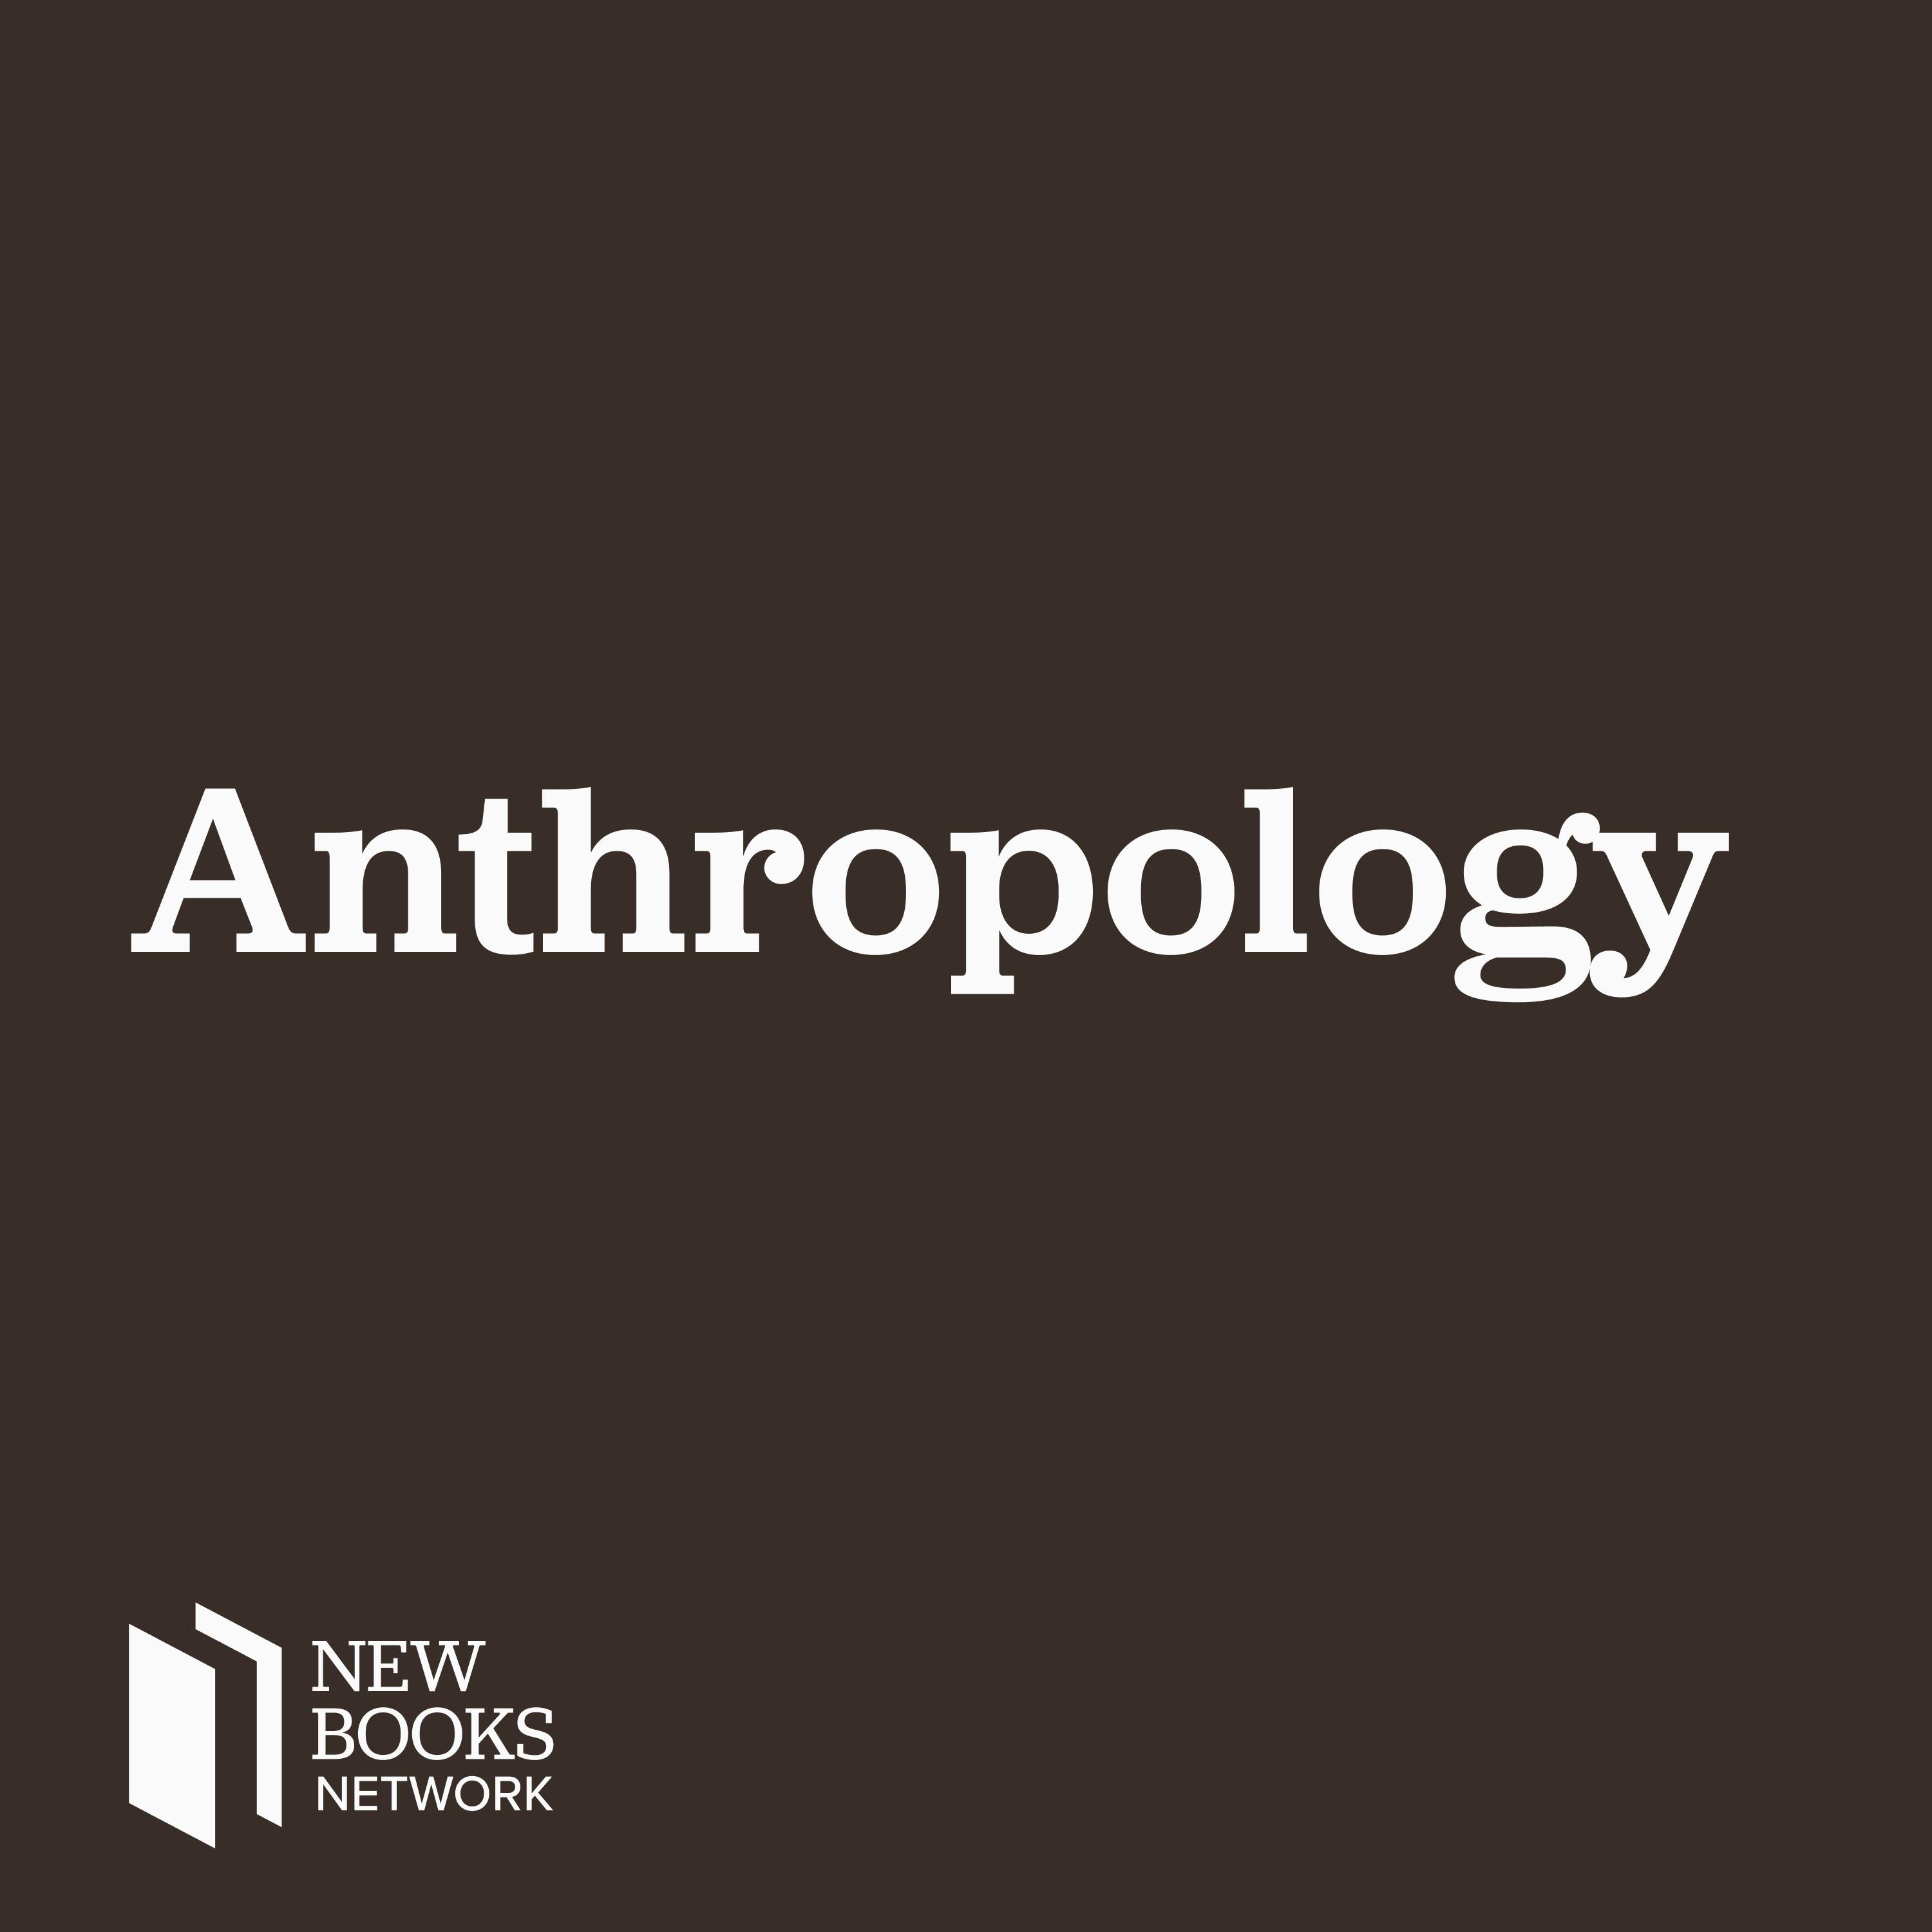 New Books in Anthropology